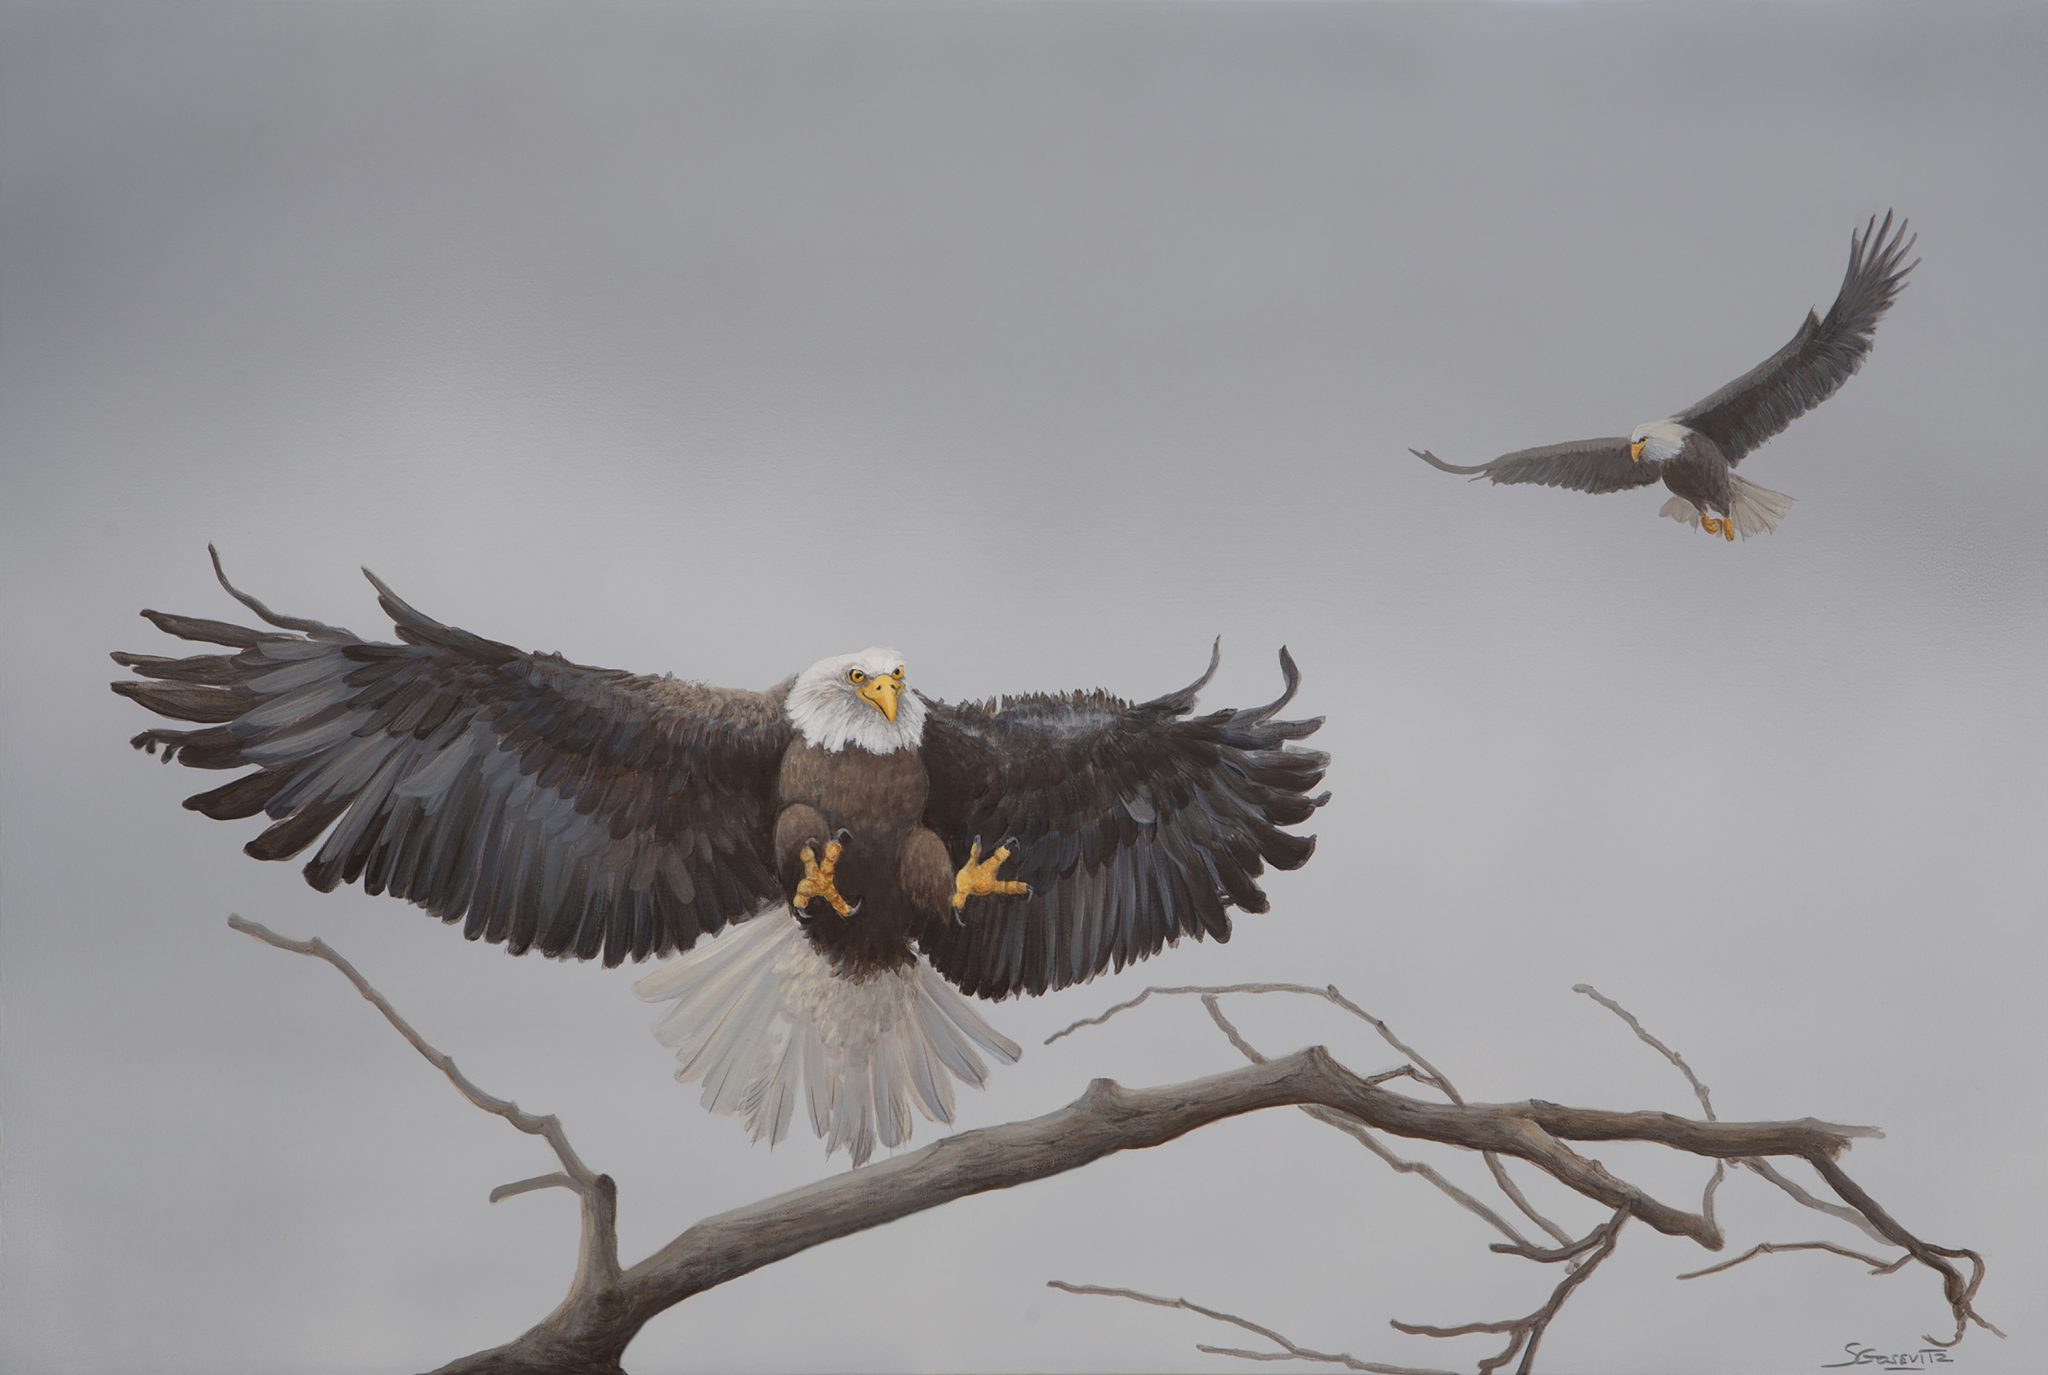 Bald eagle alightng on a branch dark browns grey neutrals and smaller eagle flying behind